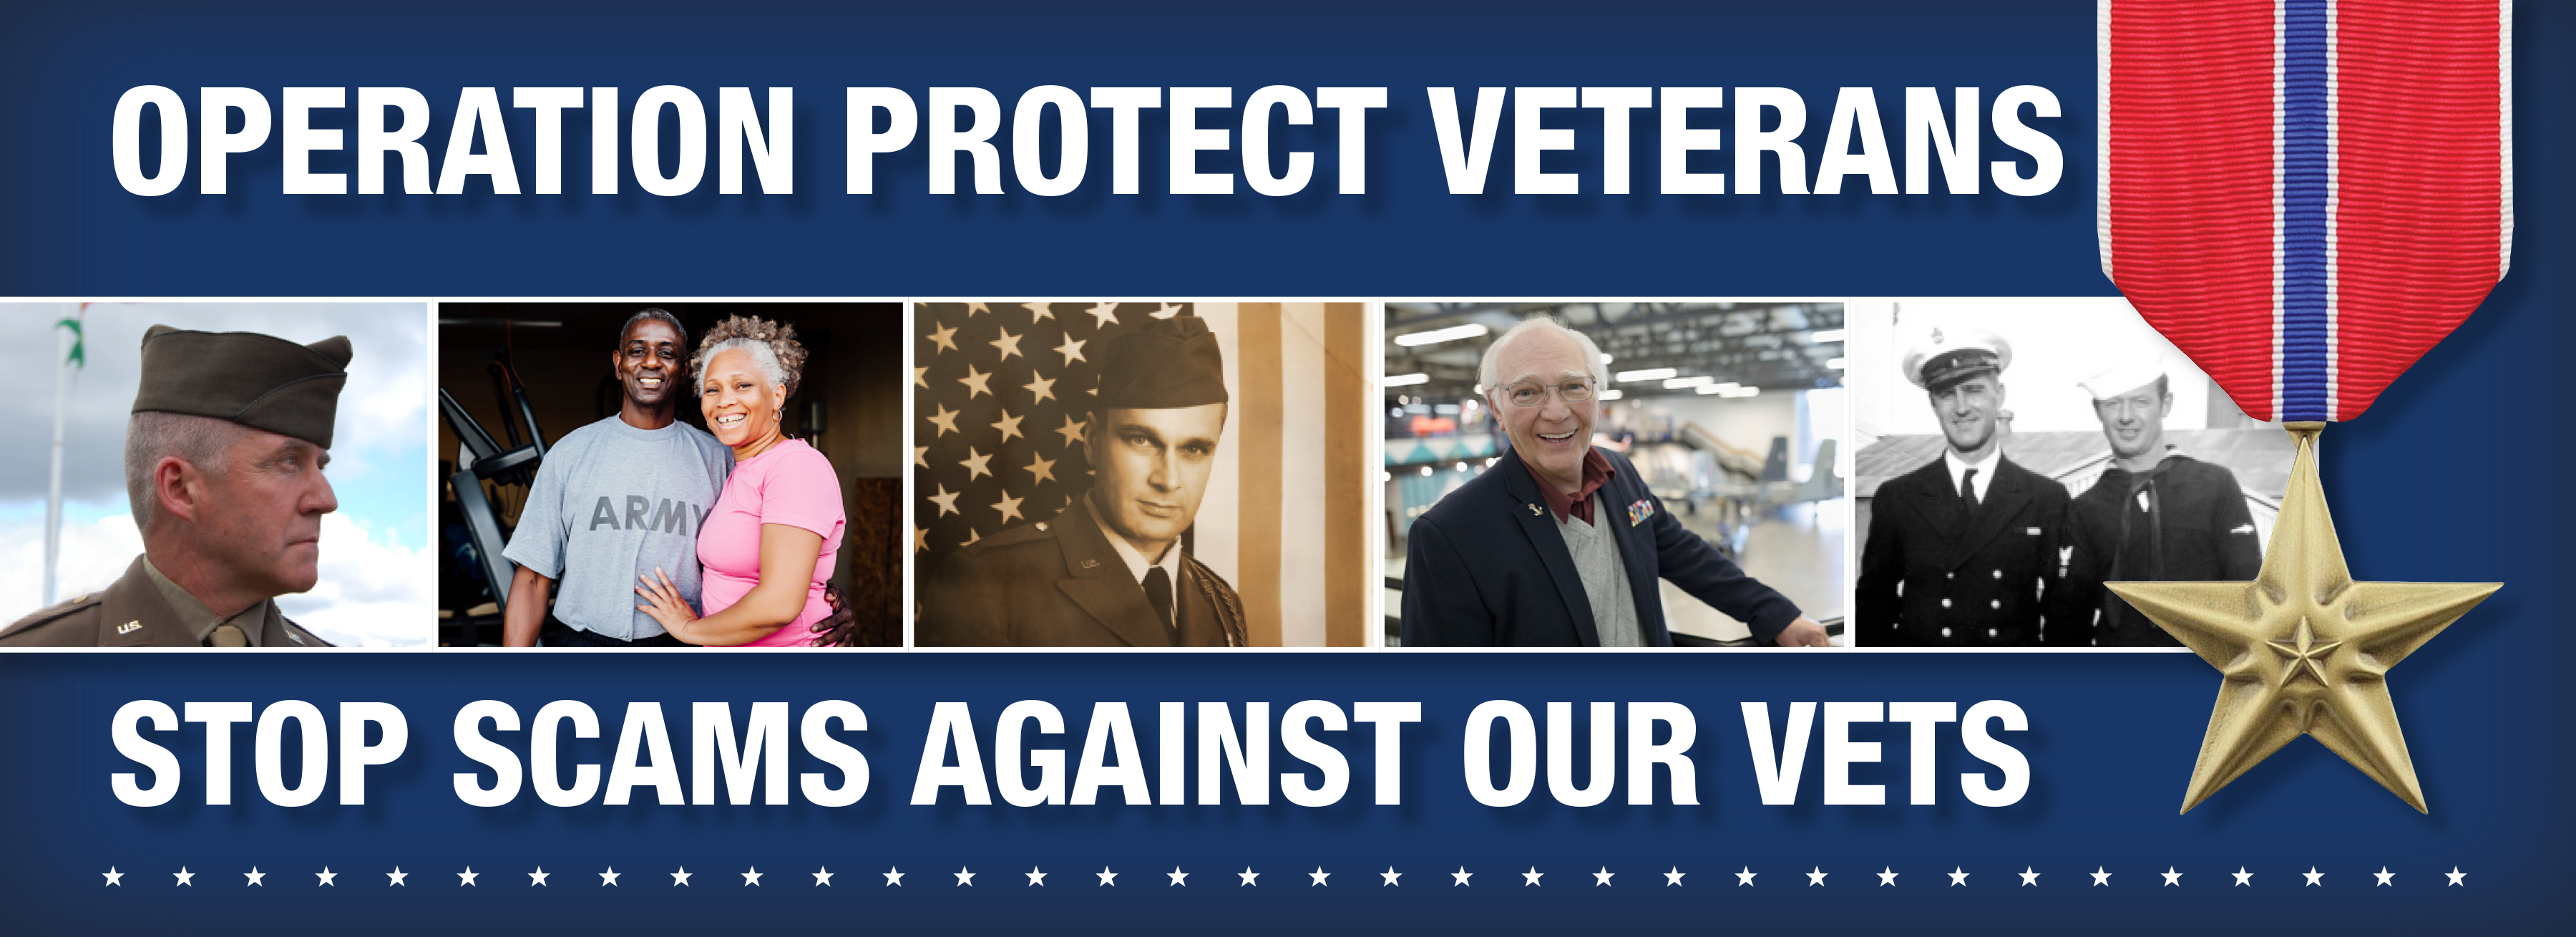 Stop Scams Against Vets Bar Graphic